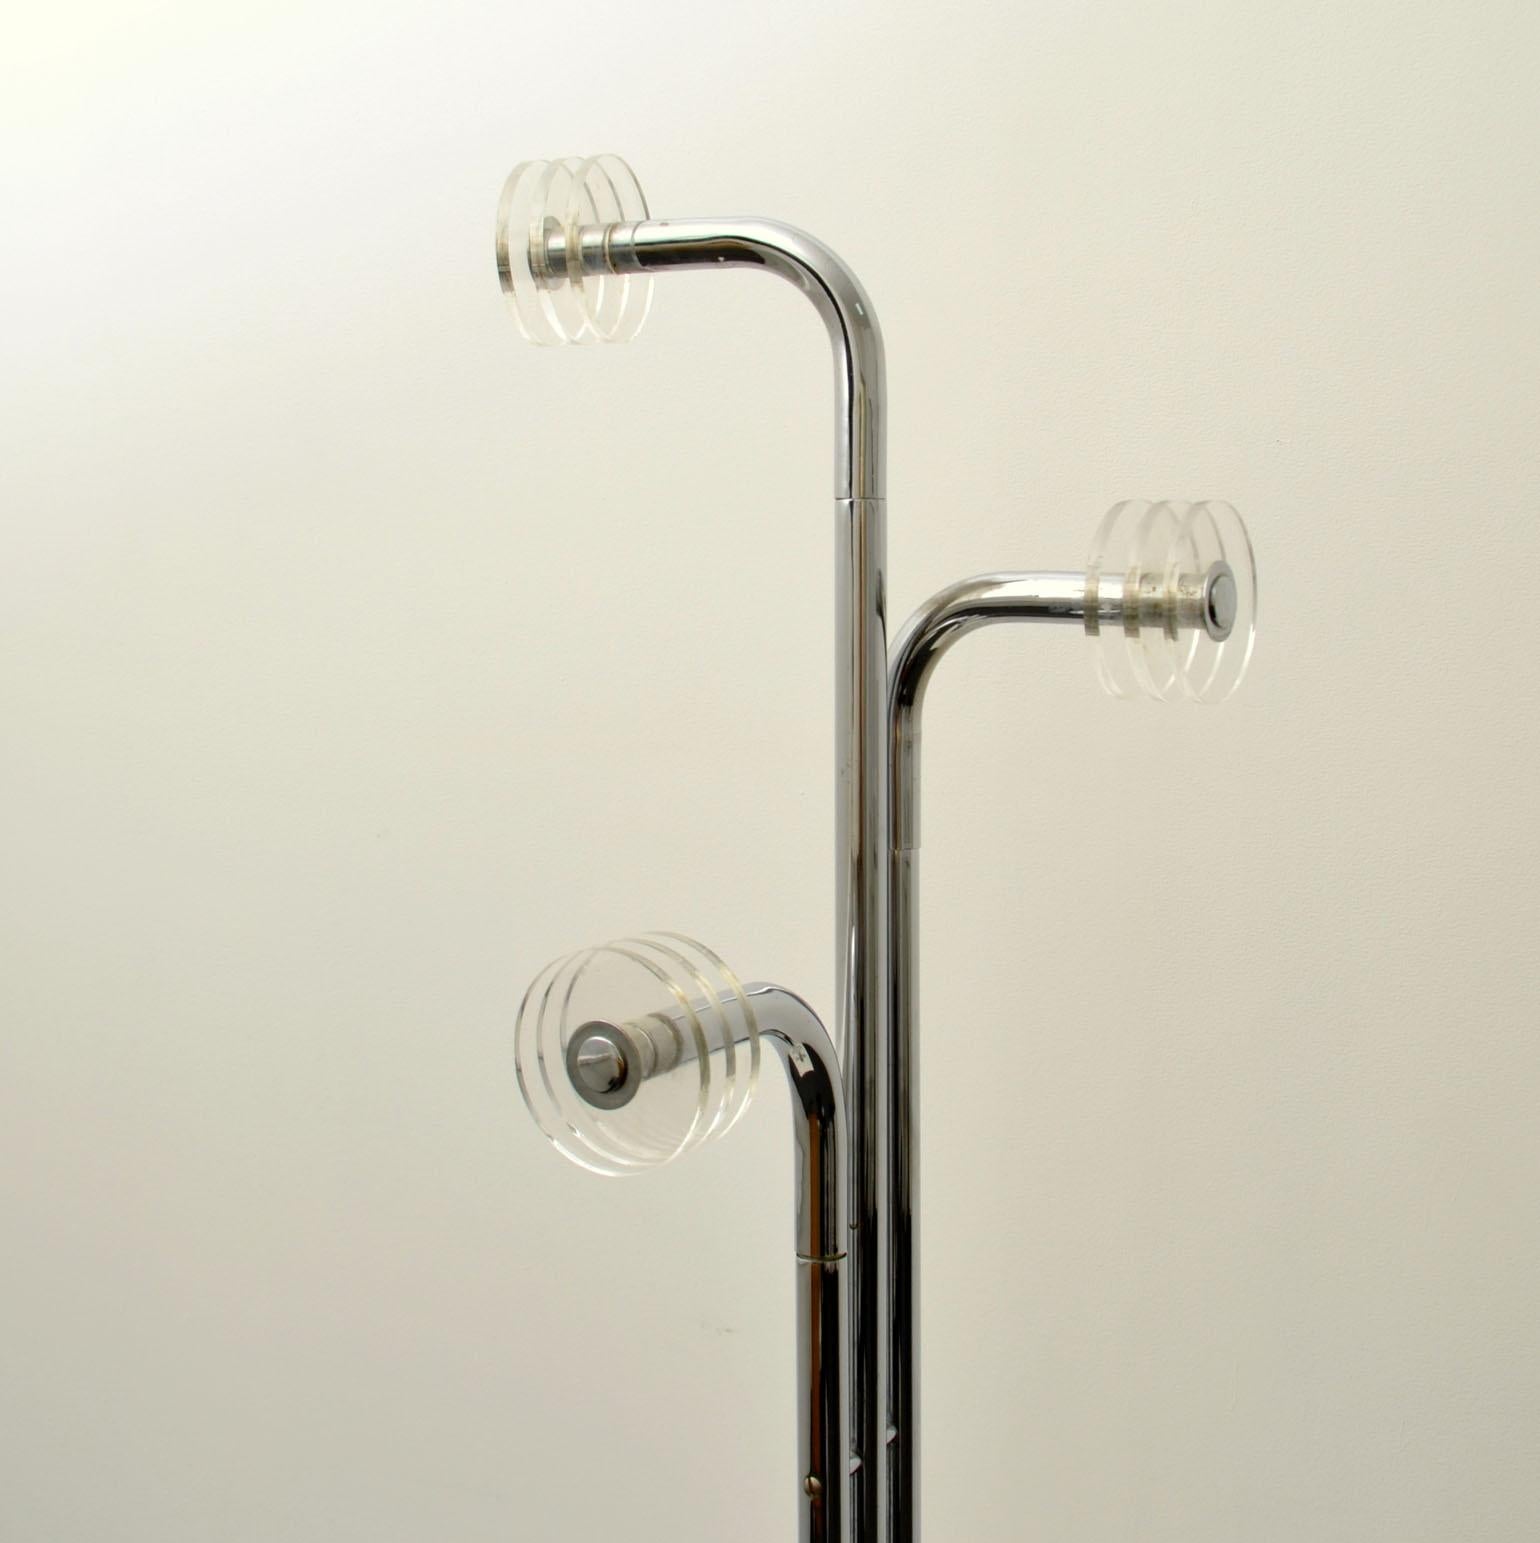 Sculptural Italian 1960s freestanding coat stand has three chrome arms with Perspex hooks and two rings for scarfs stands. The base is carrara marble black with white and gold veins.